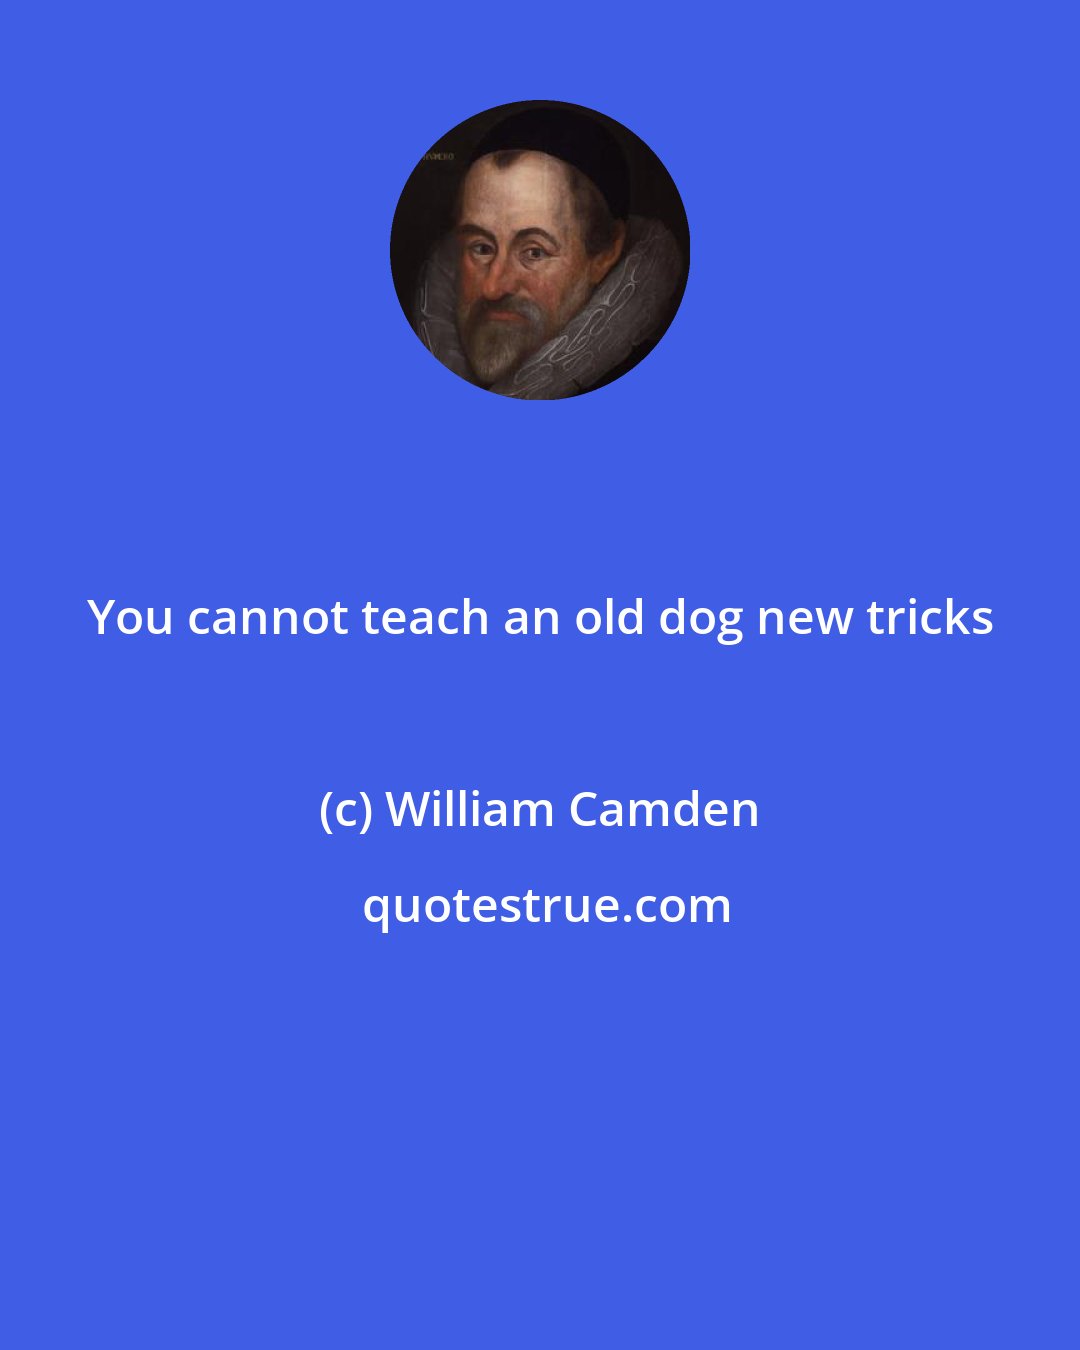 William Camden: You cannot teach an old dog new tricks